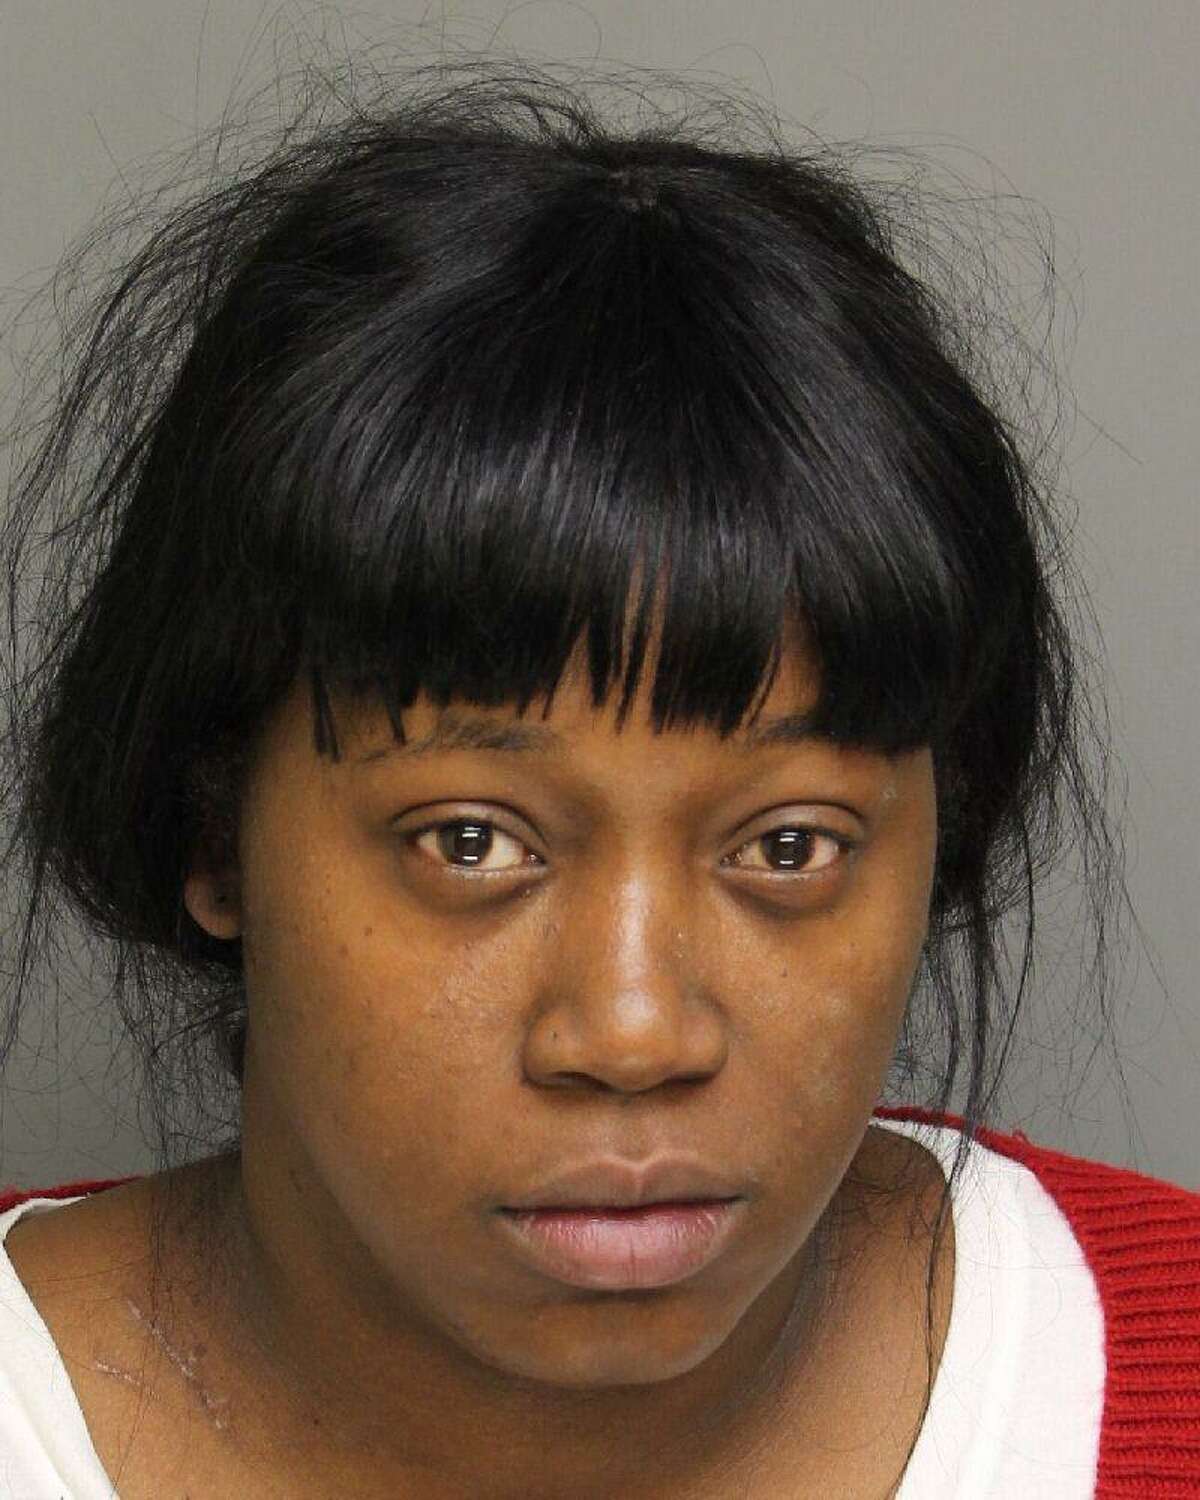 Larise King, 35, of Karen Court in Bridgeport, is accused by city police of being involved in her husband’s July 27 killing.